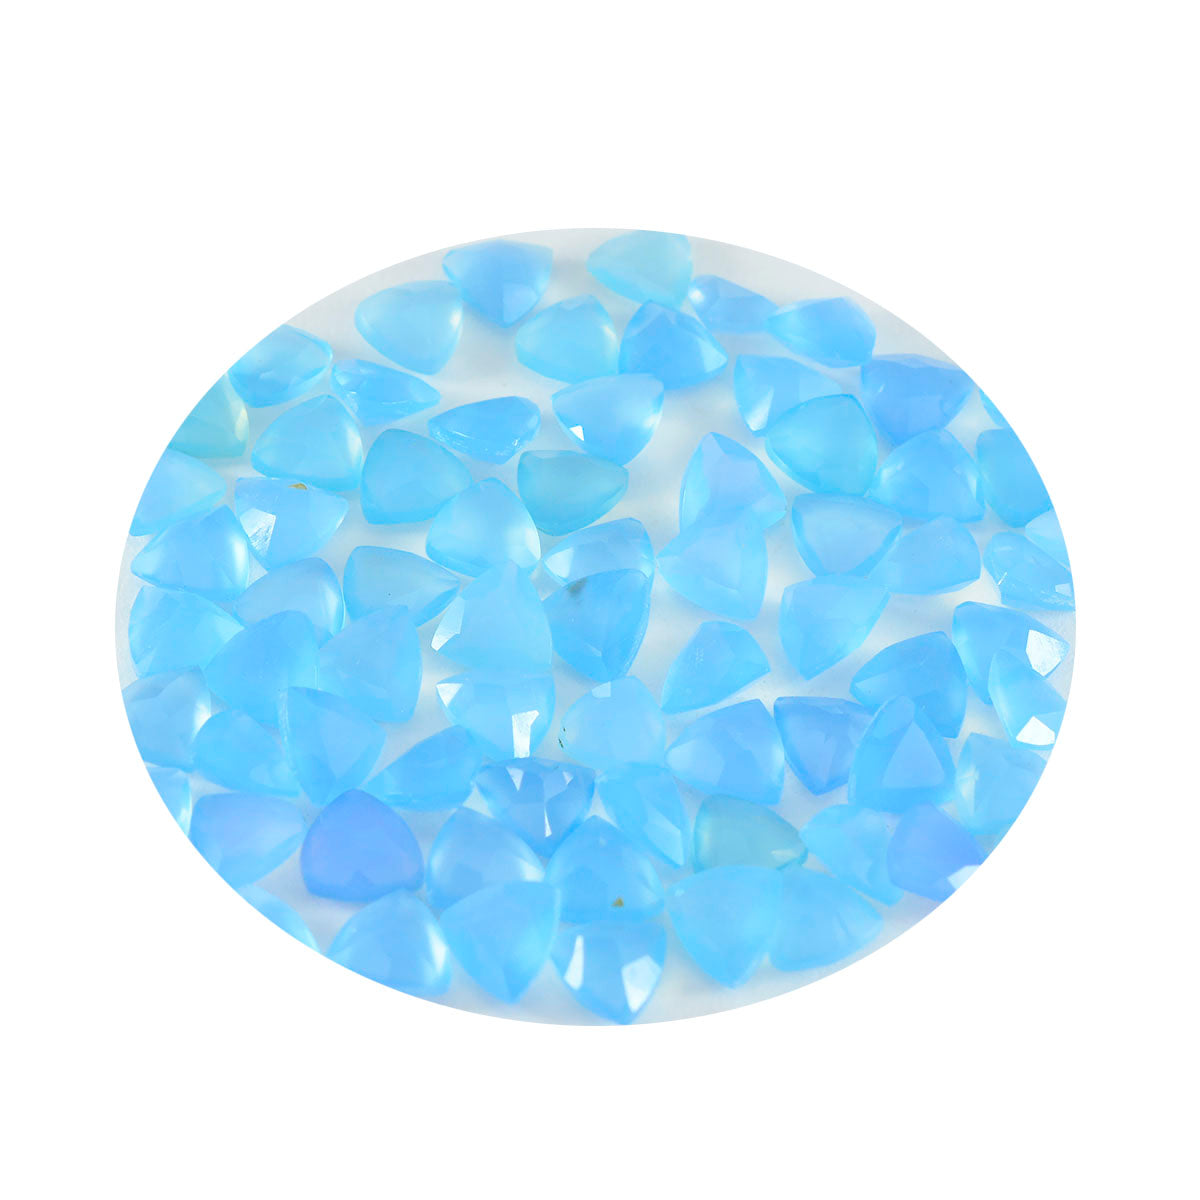 Riyogems 1PC Natural Blue Chalcedony Faceted 4x4 mm Trillion Shape excellent Quality Loose Stone